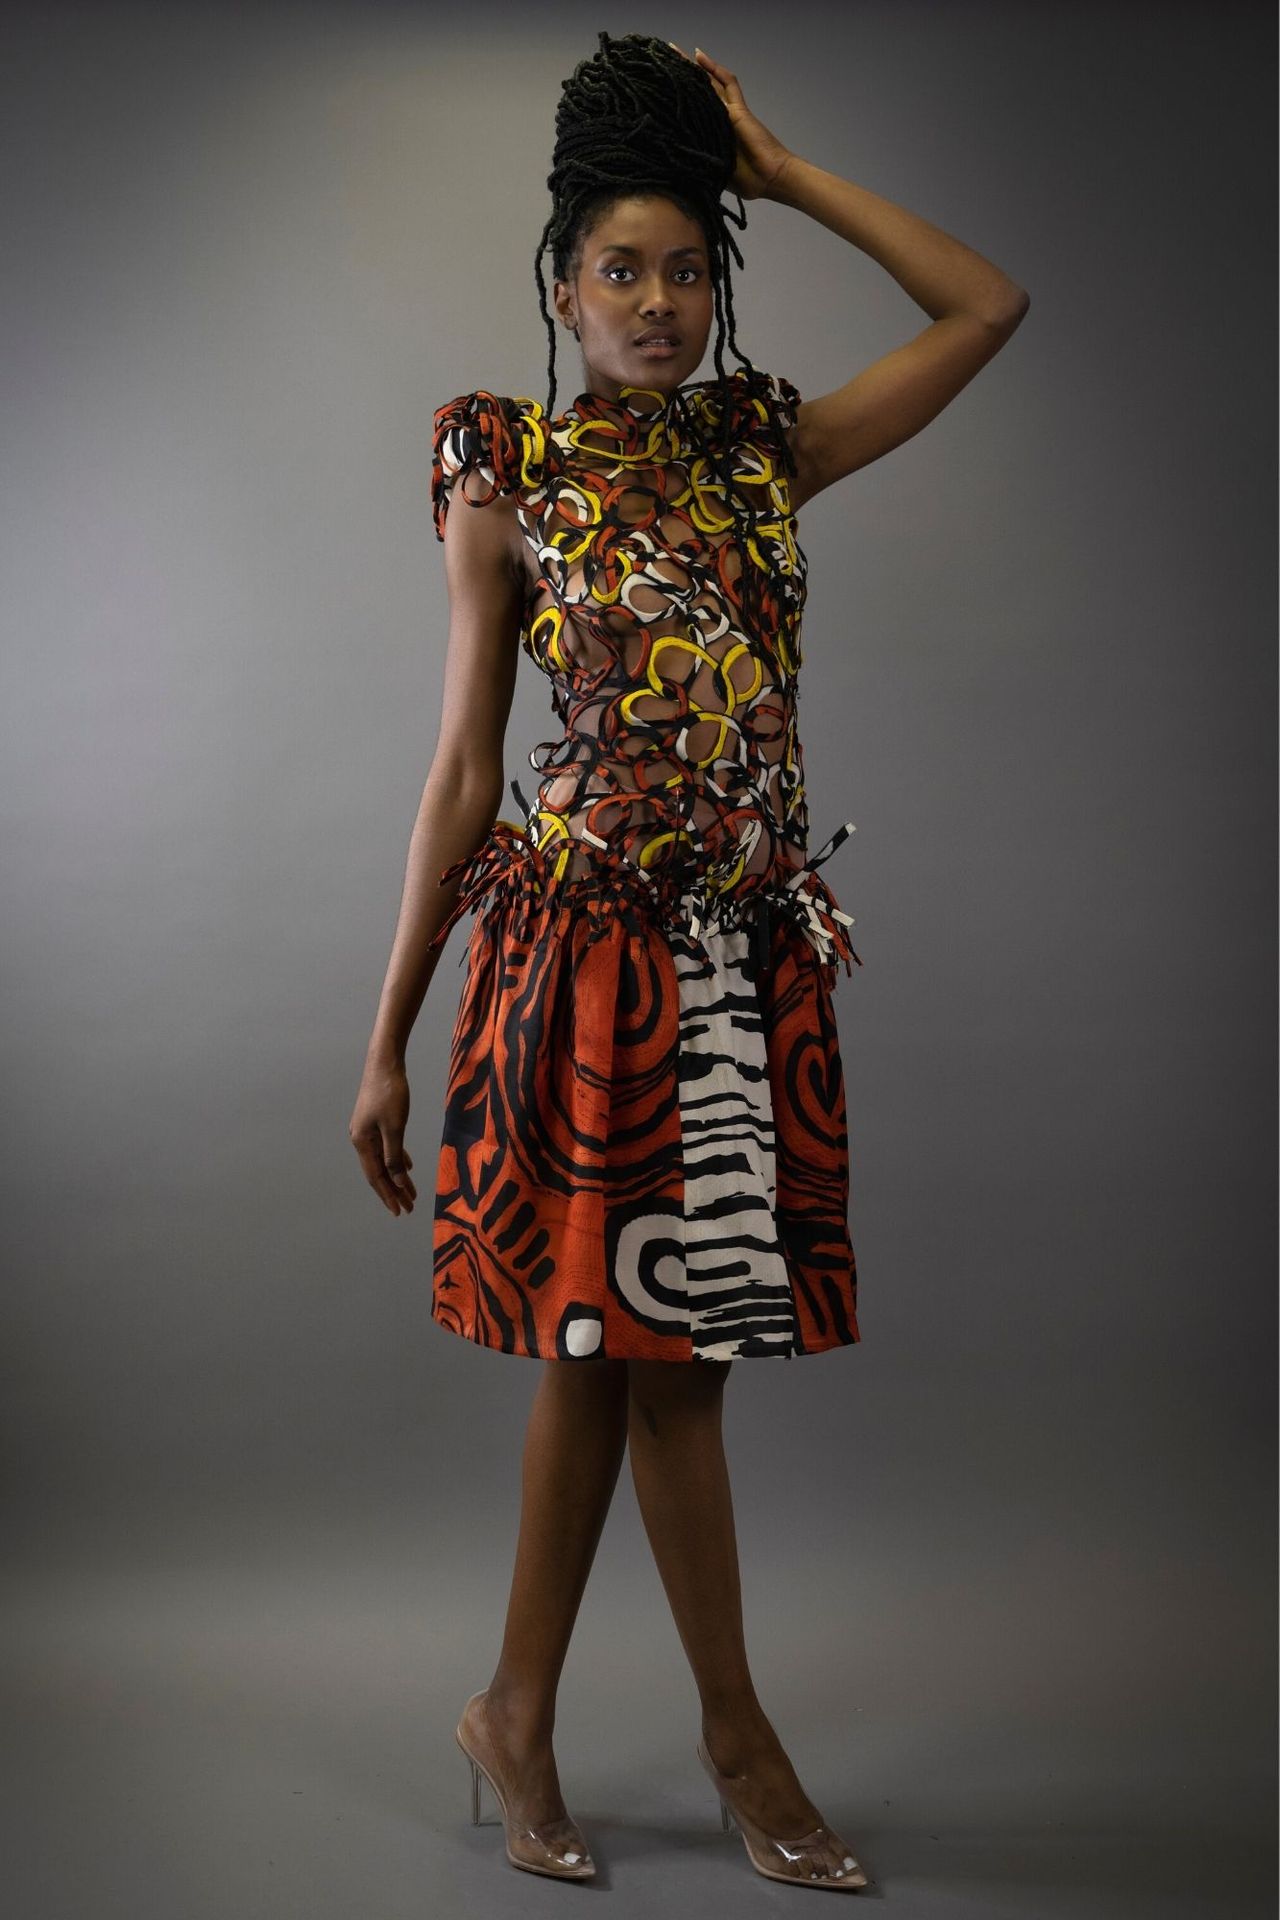 Robe "African Queen" Dress "African Queen" from the deconstruction of a long ski&hellip;